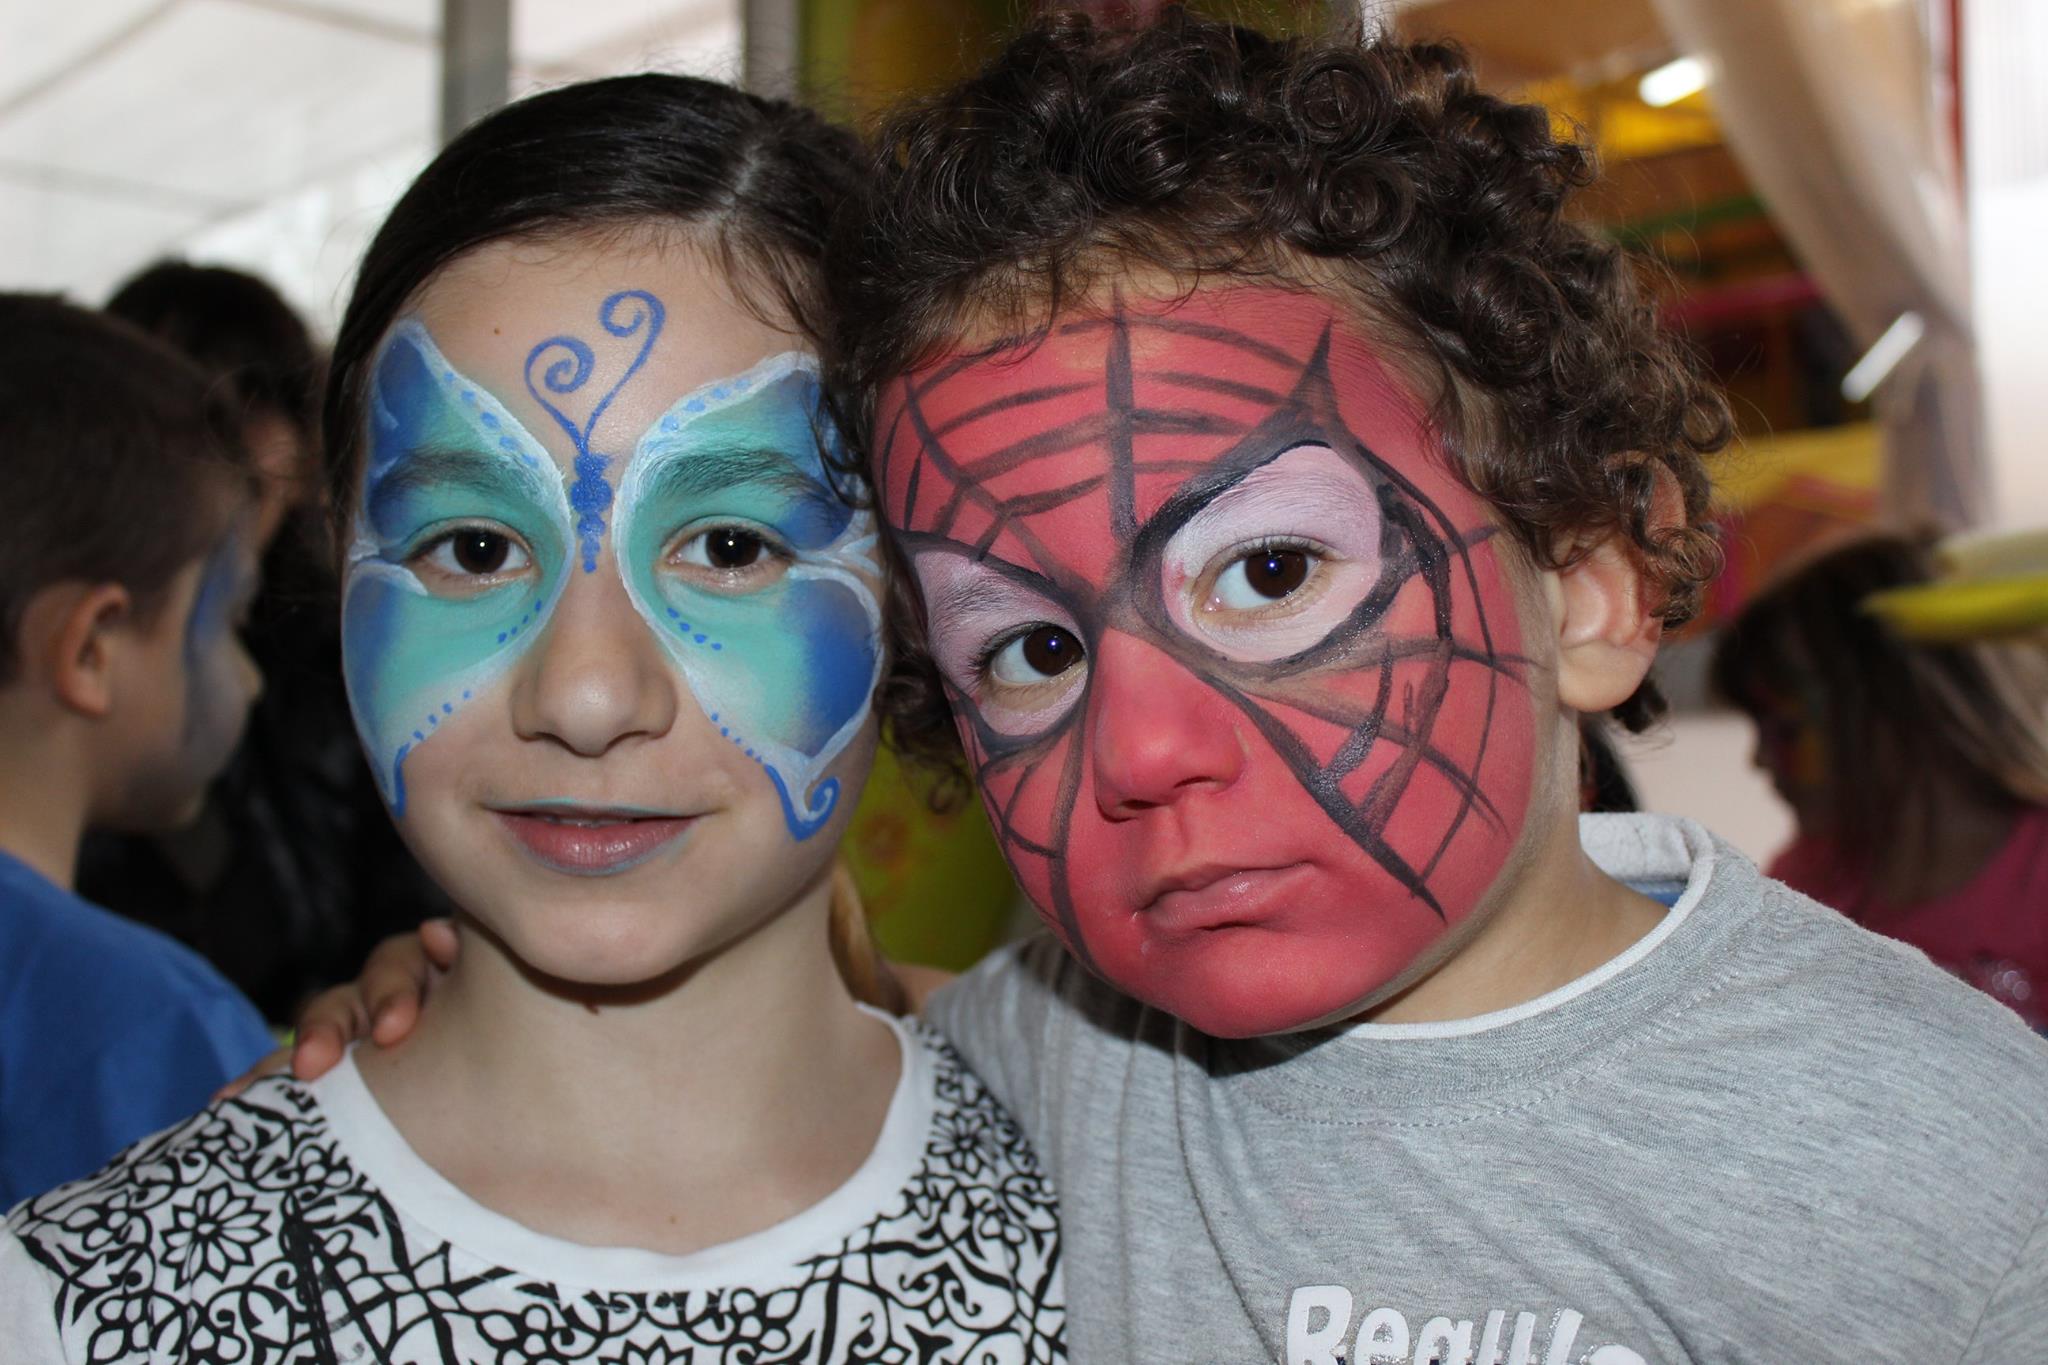 FACE PAINTING